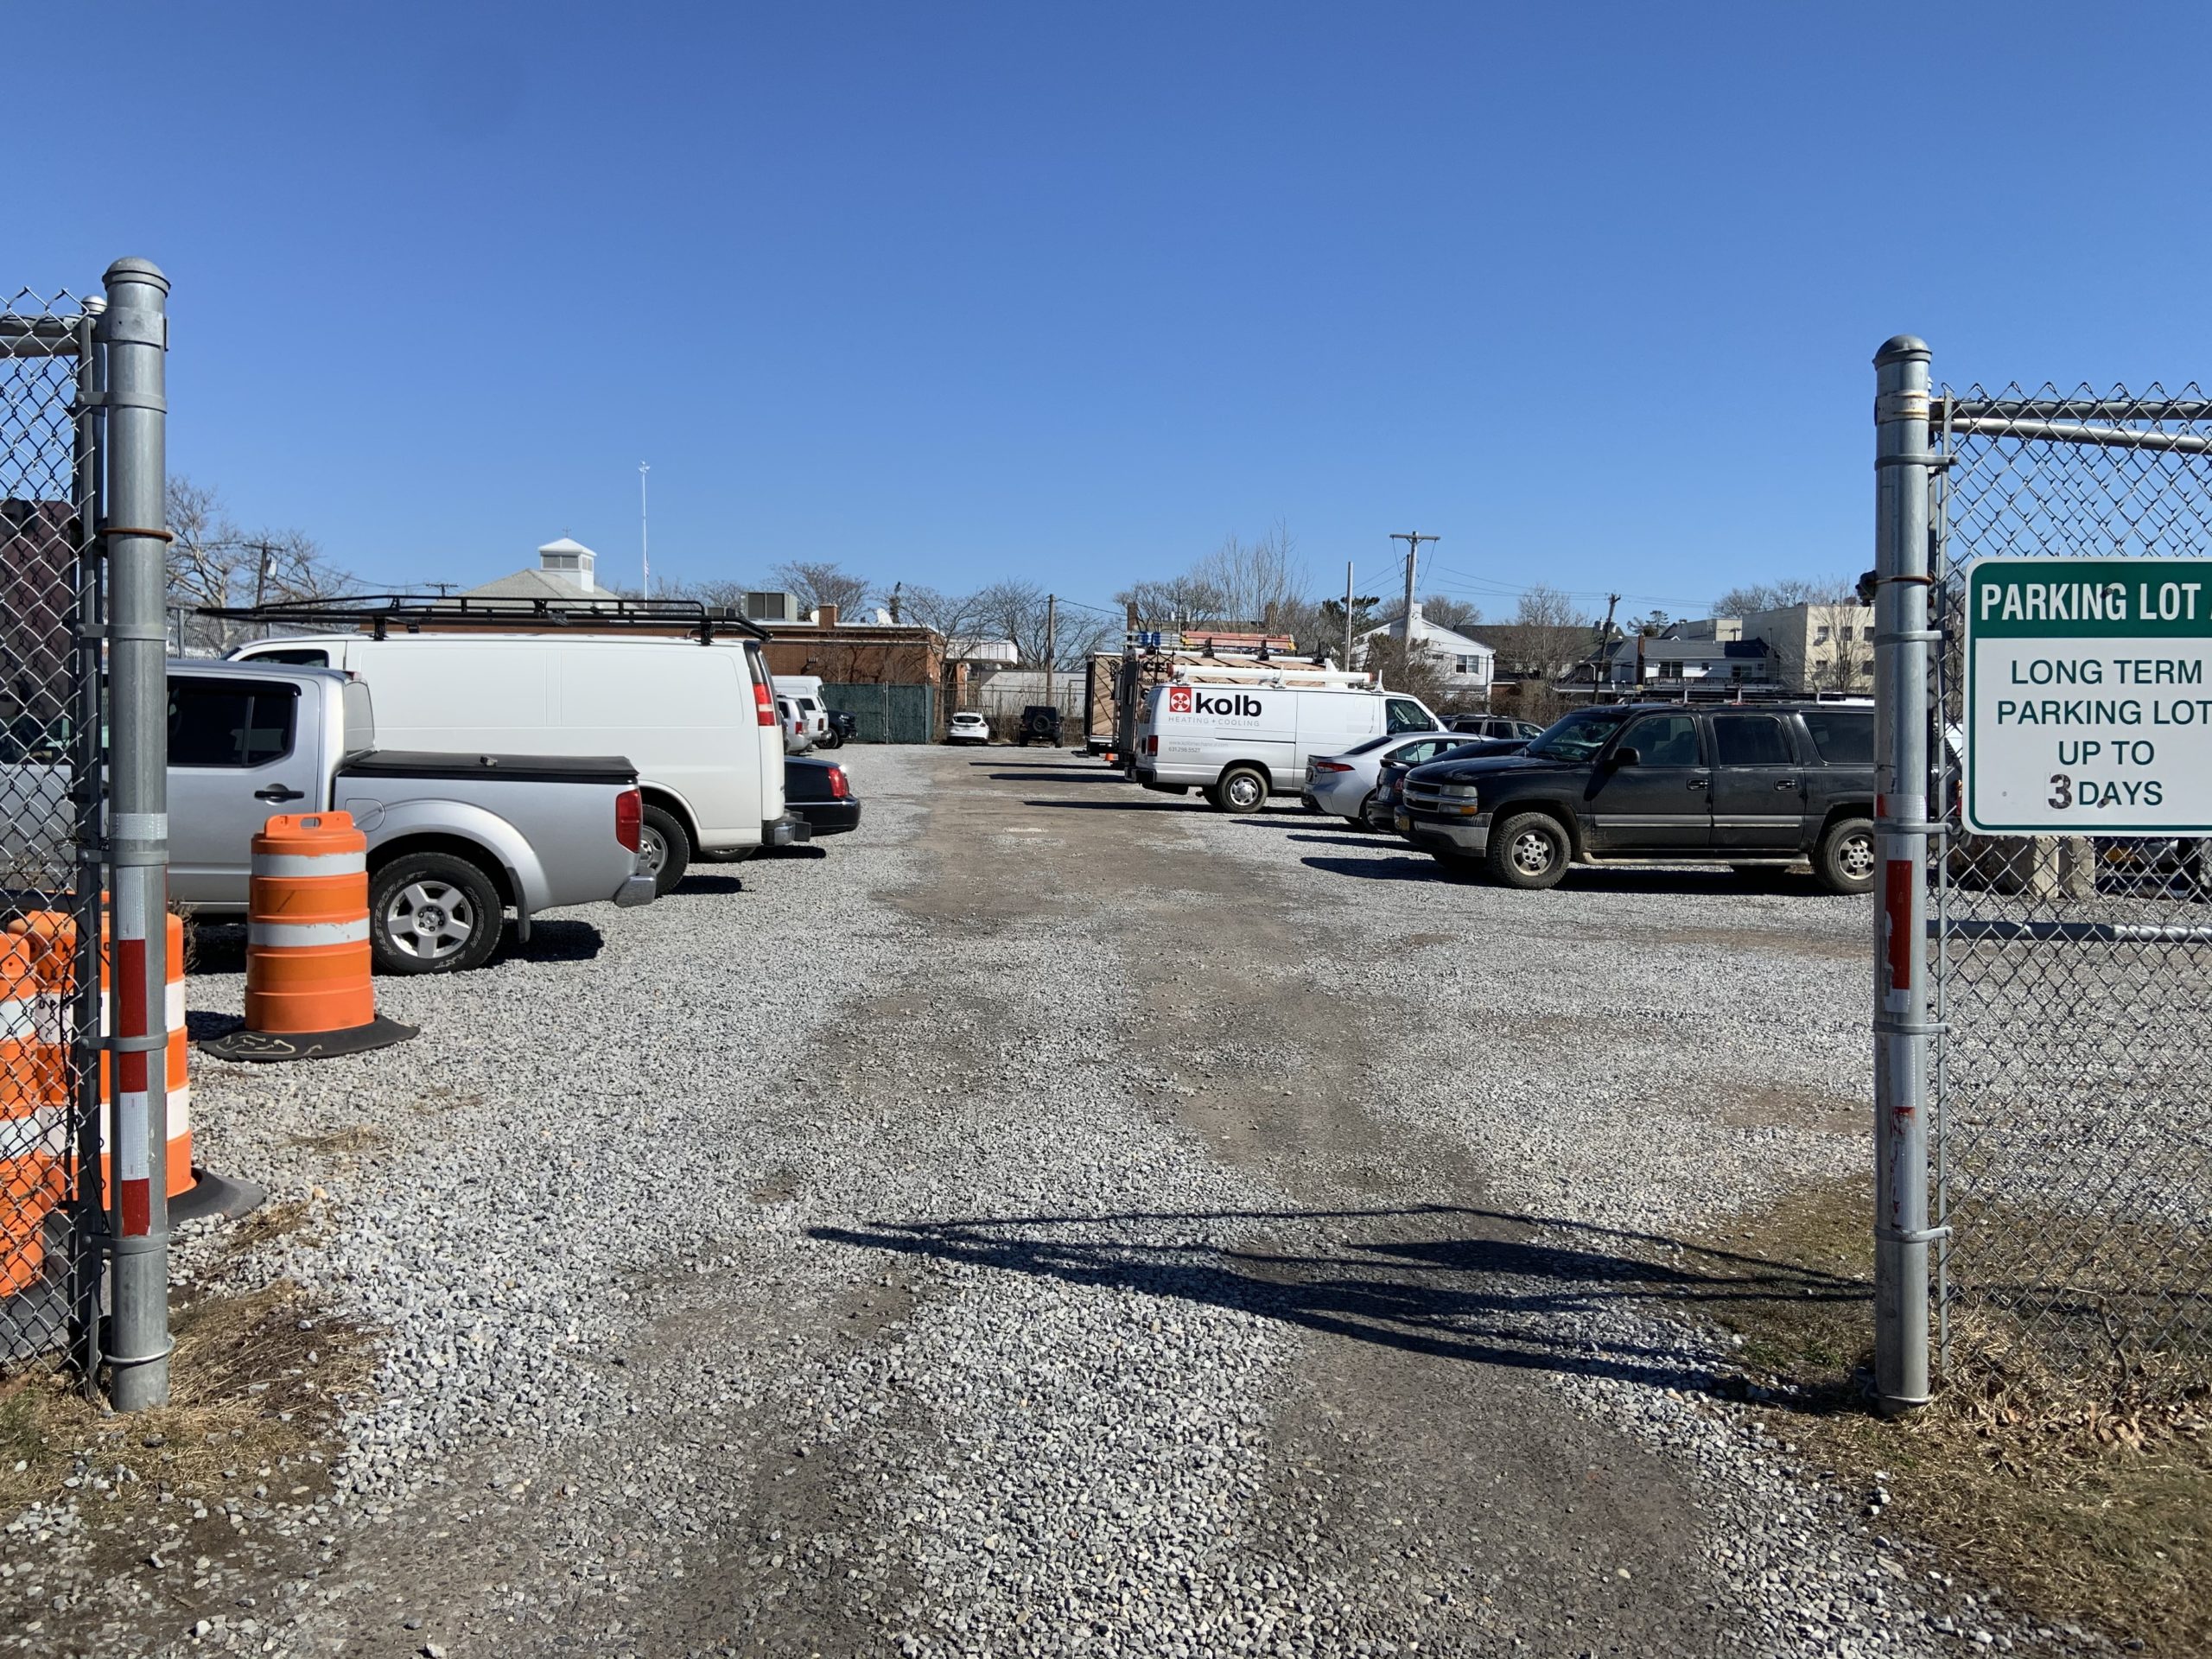 Sag Harbor Village is seeking a long-term lease on the National Grid property at the corner of Bridge and Water streets, which has been used as a long-term parking lot. STEPHEN J. KOTZ